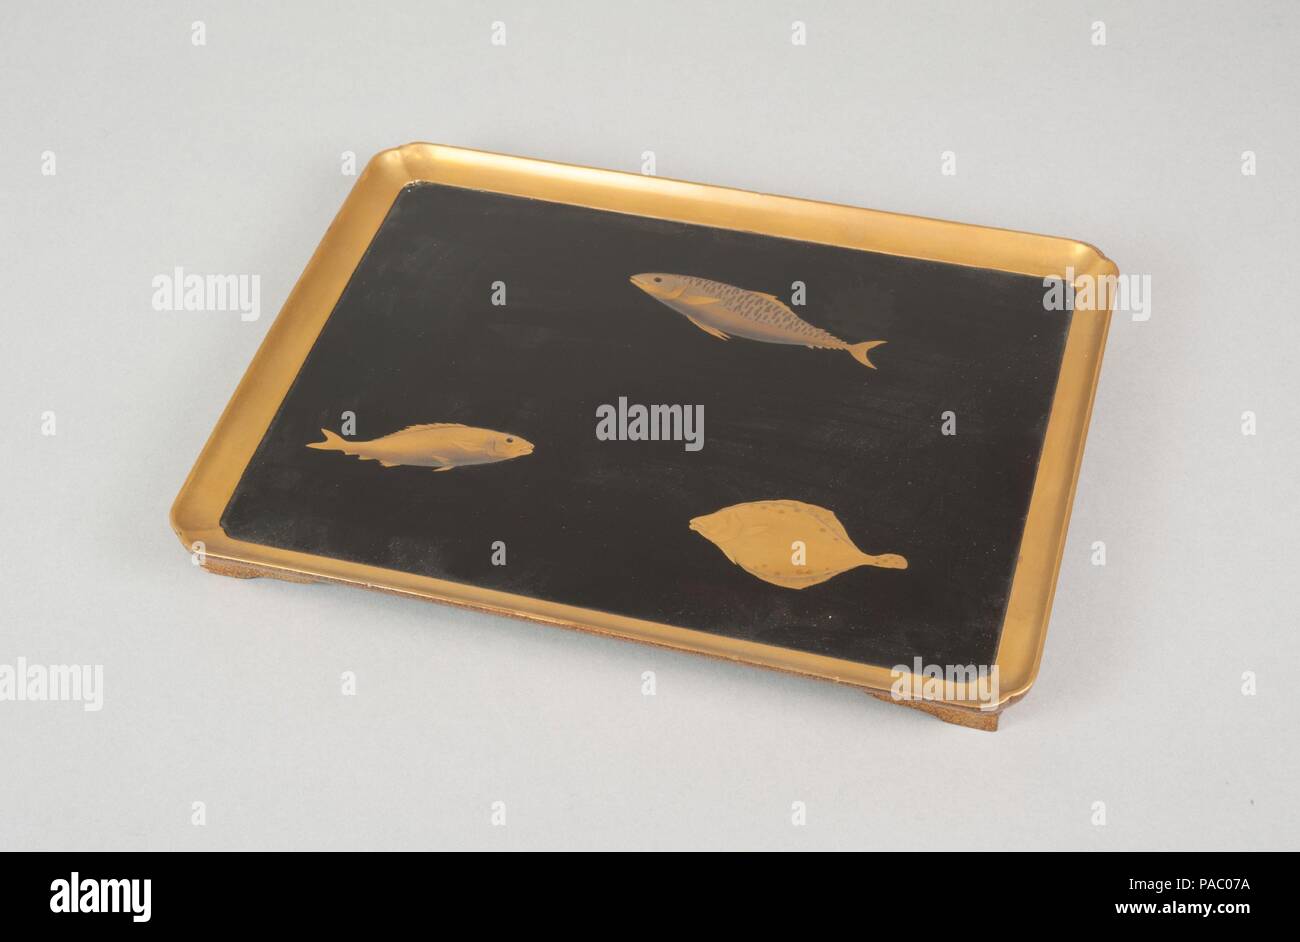 Tray. Culture: Japan. Dimensions: H. 13/16 in. (2.1 cm); W. 6 3/4 in. (17.1 cm); D. 9 in. (22.9 cm). Date: 19th century. Museum: Metropolitan Museum of Art, New York, USA. Stock Photo